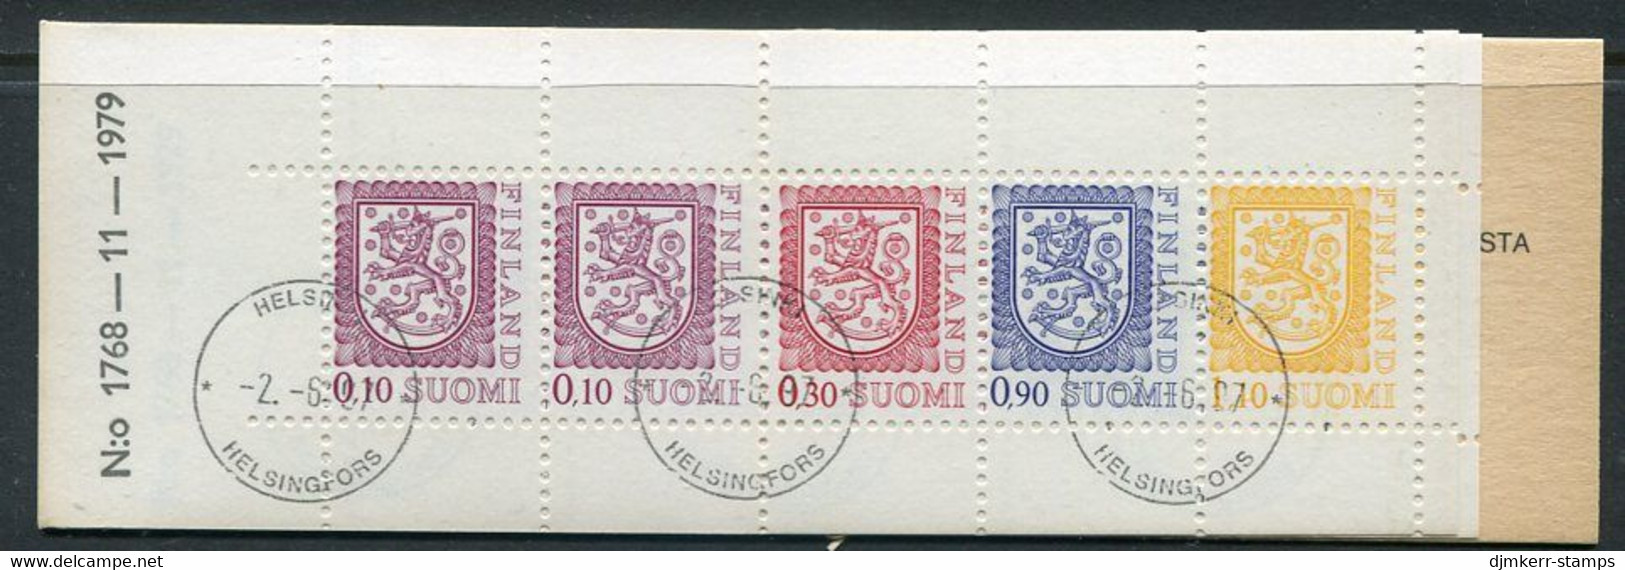 FINLAND 1980 Lion Definitive Type I 5 Mk. Complete Booklet Cancelled.  Michel MH 12 I - Carnets